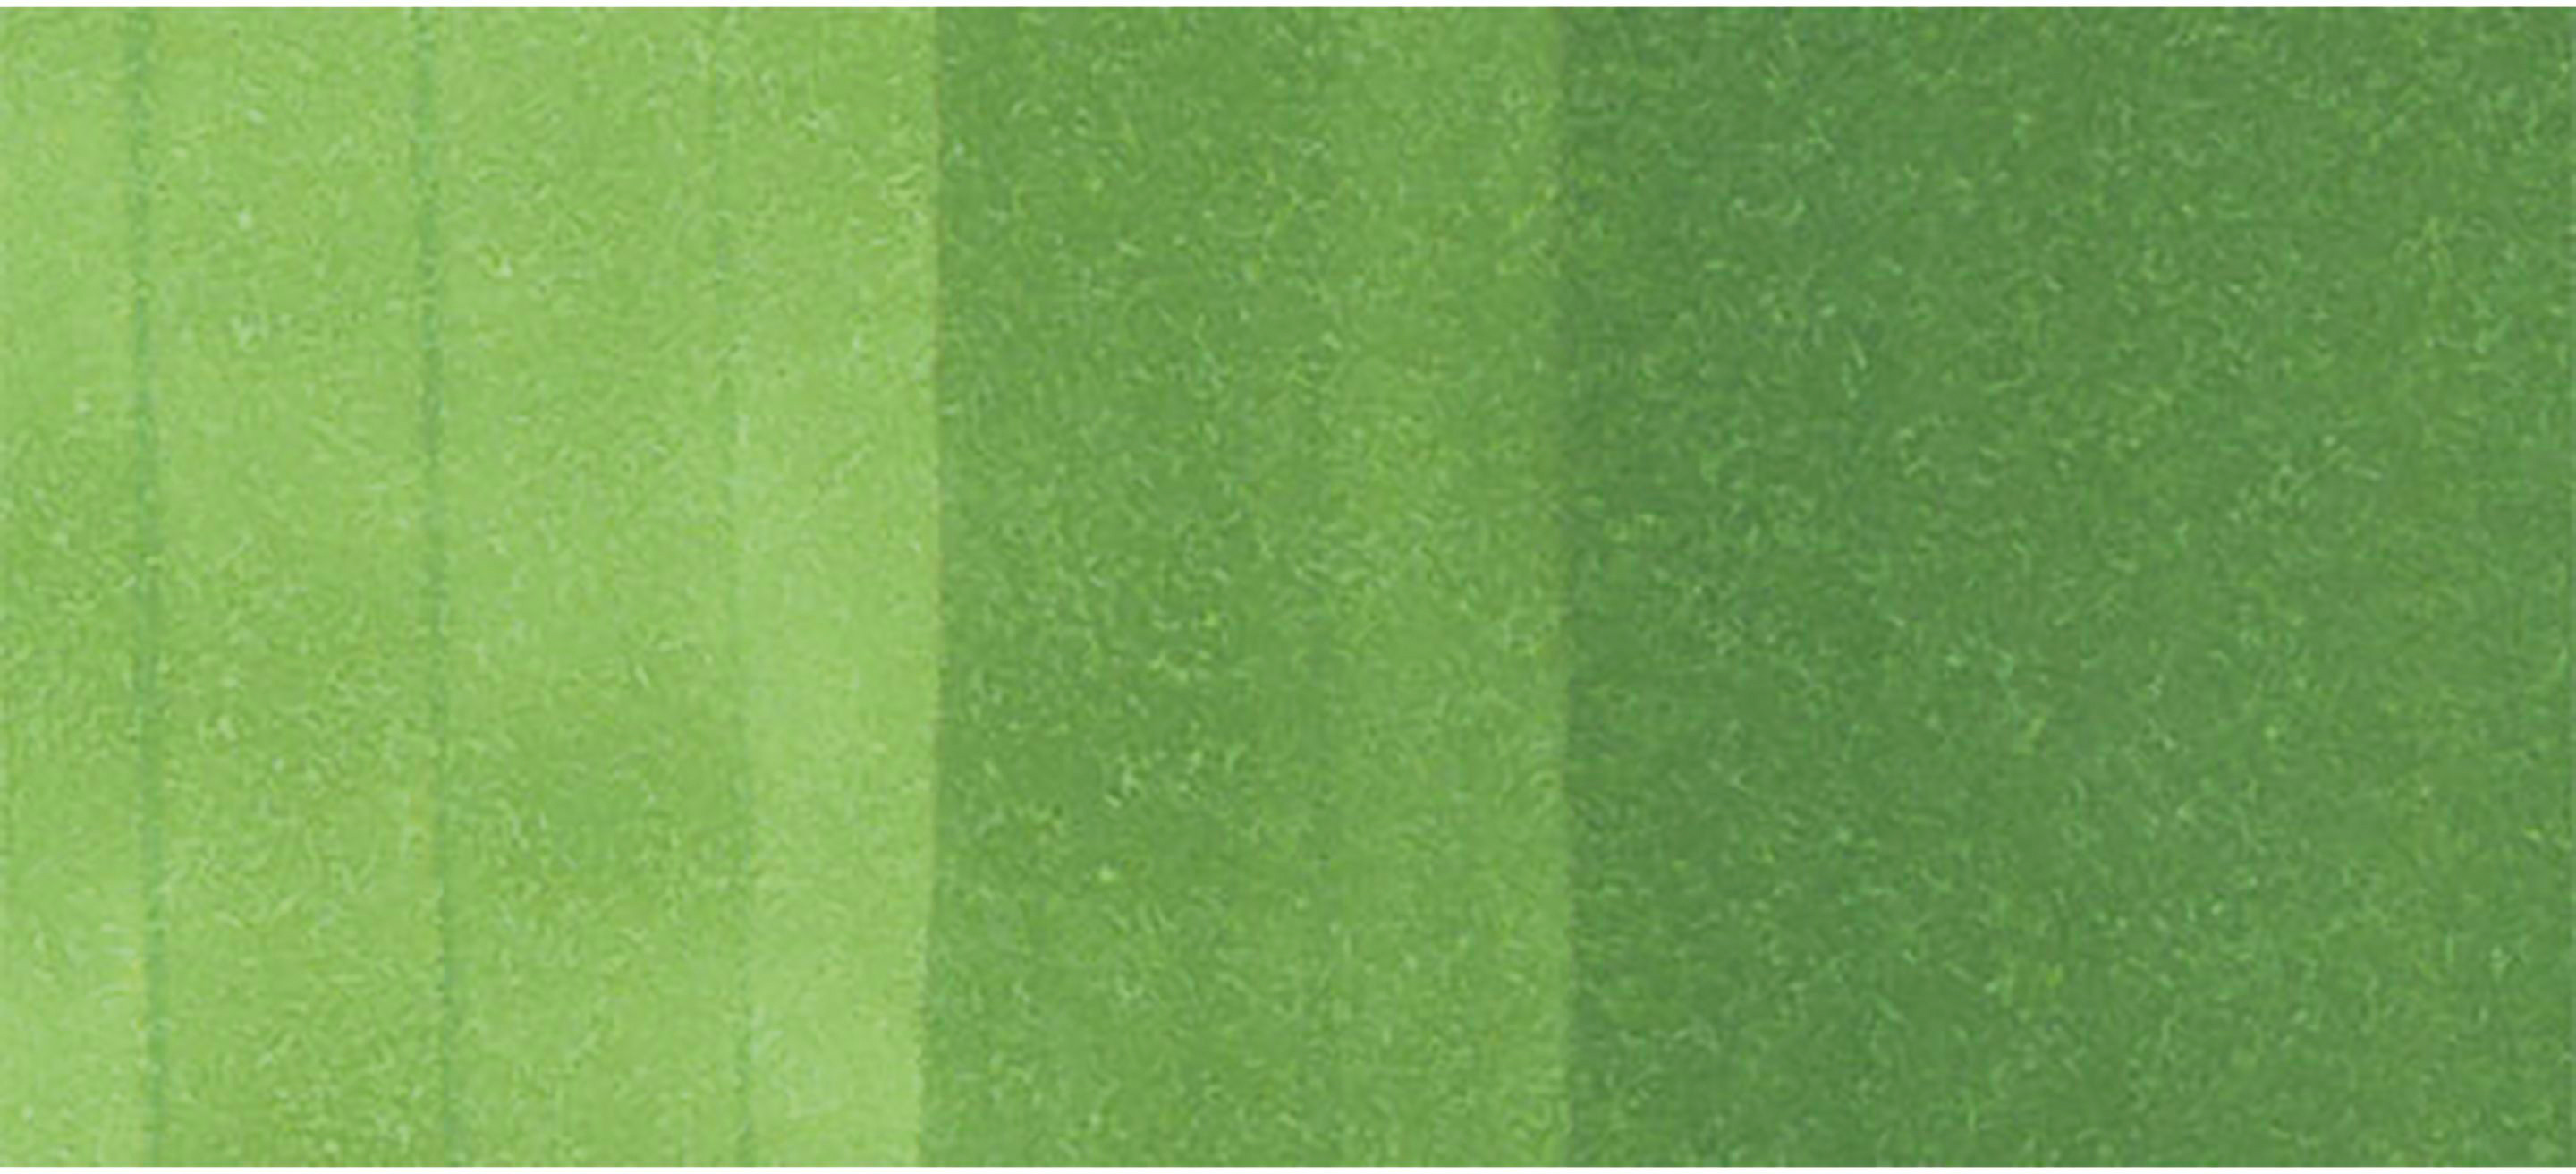 COPIC Marker Ciao 22075141 YG17 - Grass Green